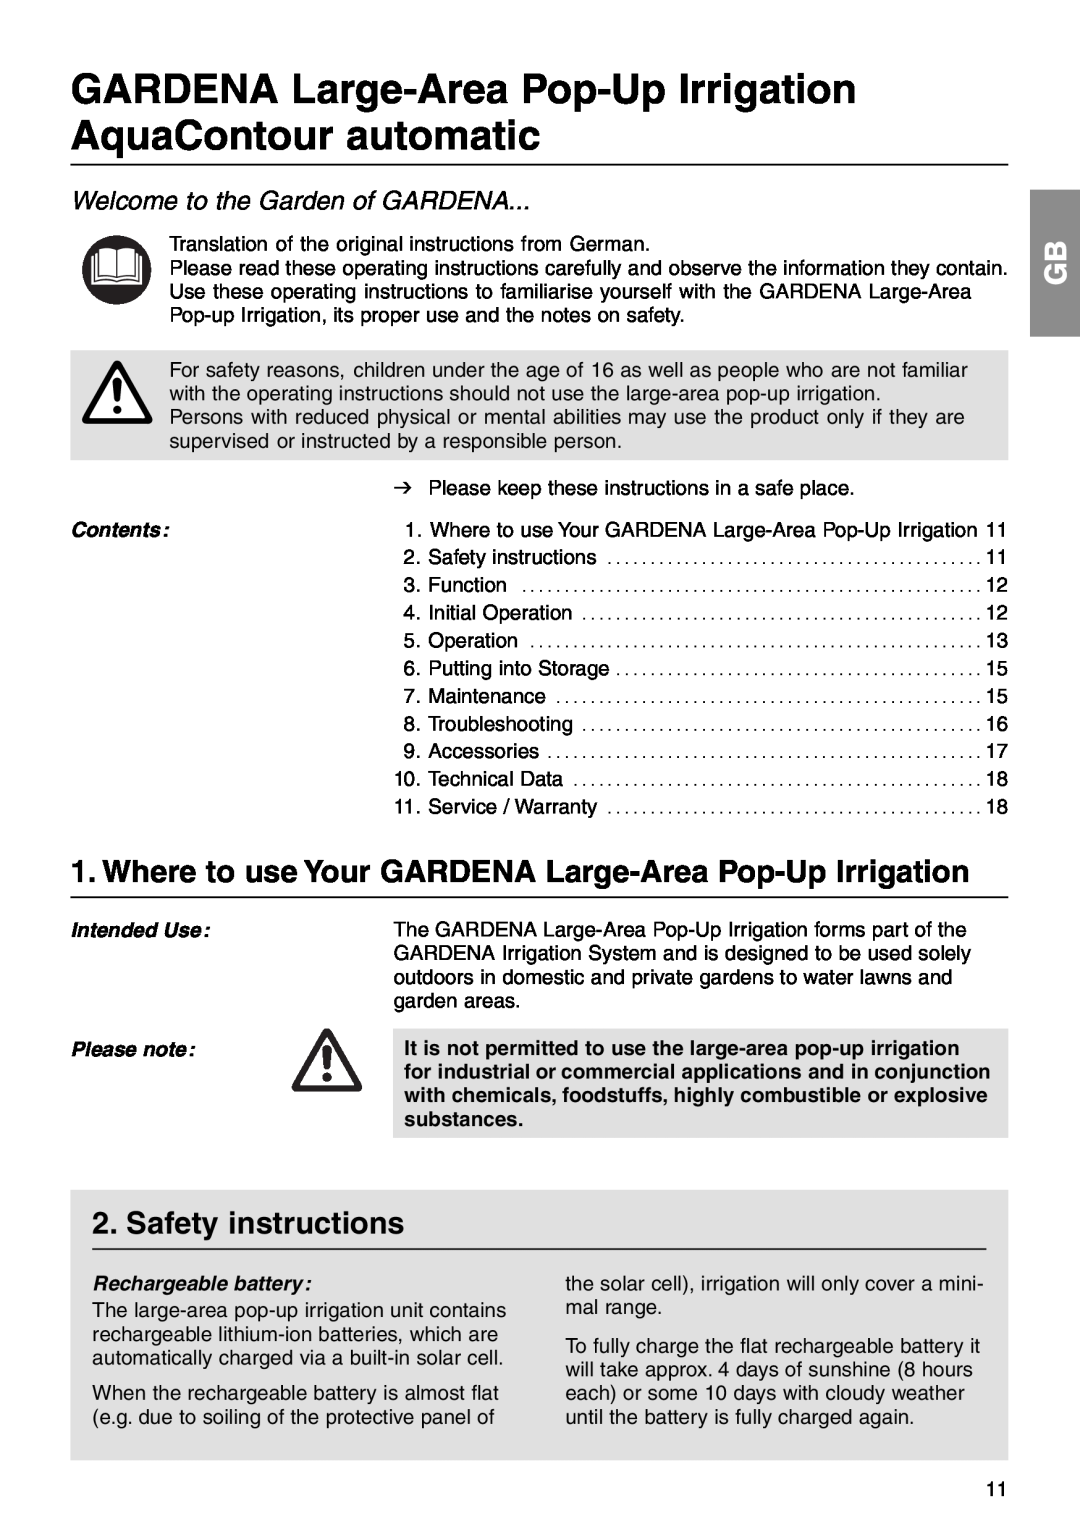 Gardena 1559 Where to use Your GARDENA Large-Area Pop-Up Irrigation, Safety instructions, Welcome to the Garden of GARDENA 